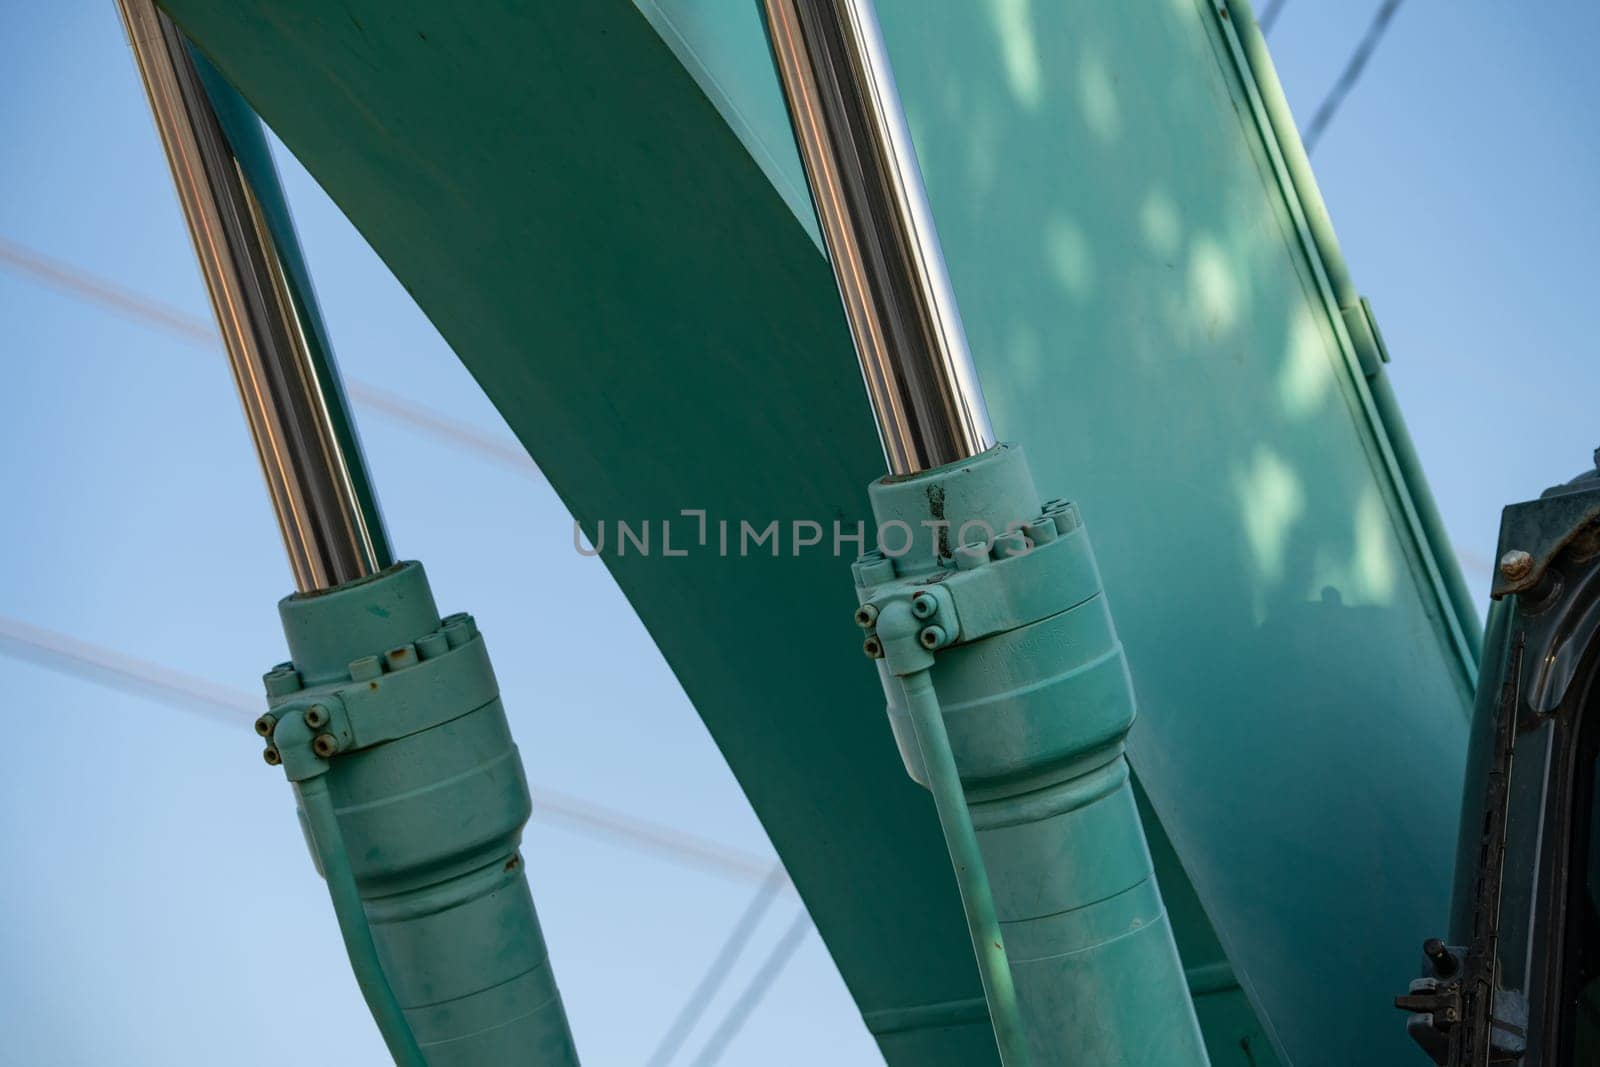 Closeup view of stainless steel hydraulic arm on green excavator. Stainless steel power in the hydraulic arm of an excavator. Stainless steel hydraulic arm of excavator unveils industrial precision. by Fahroni